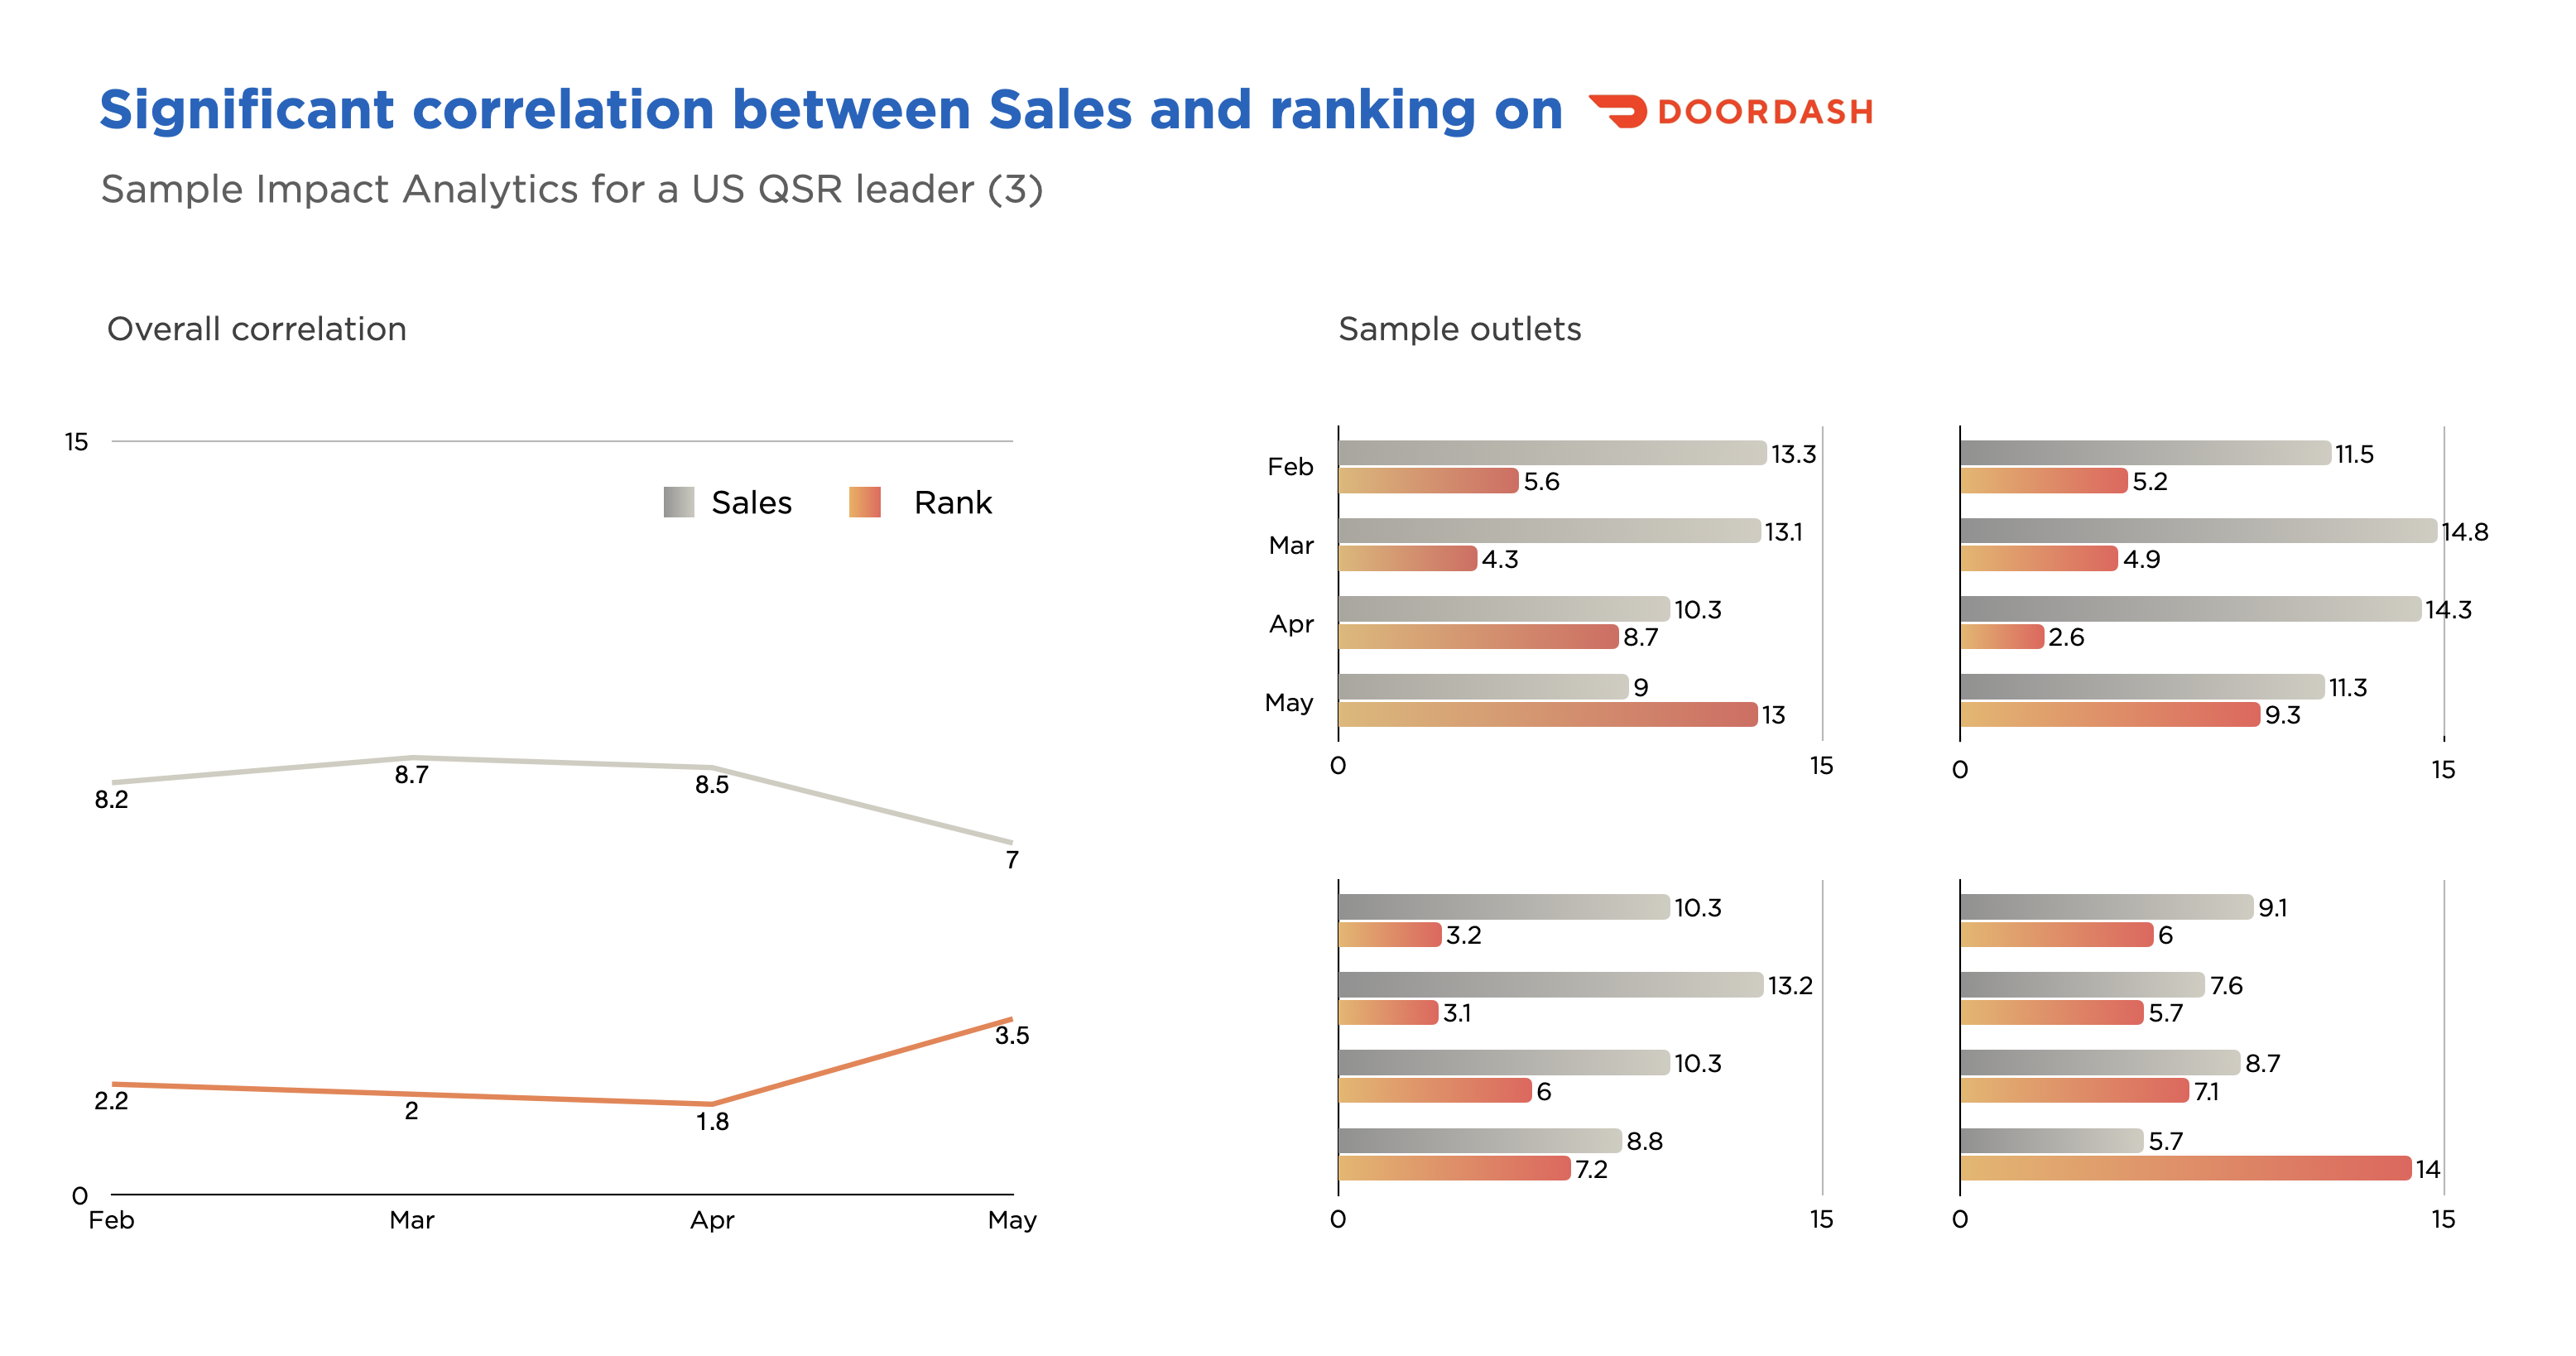 High correlation between ranking and sales